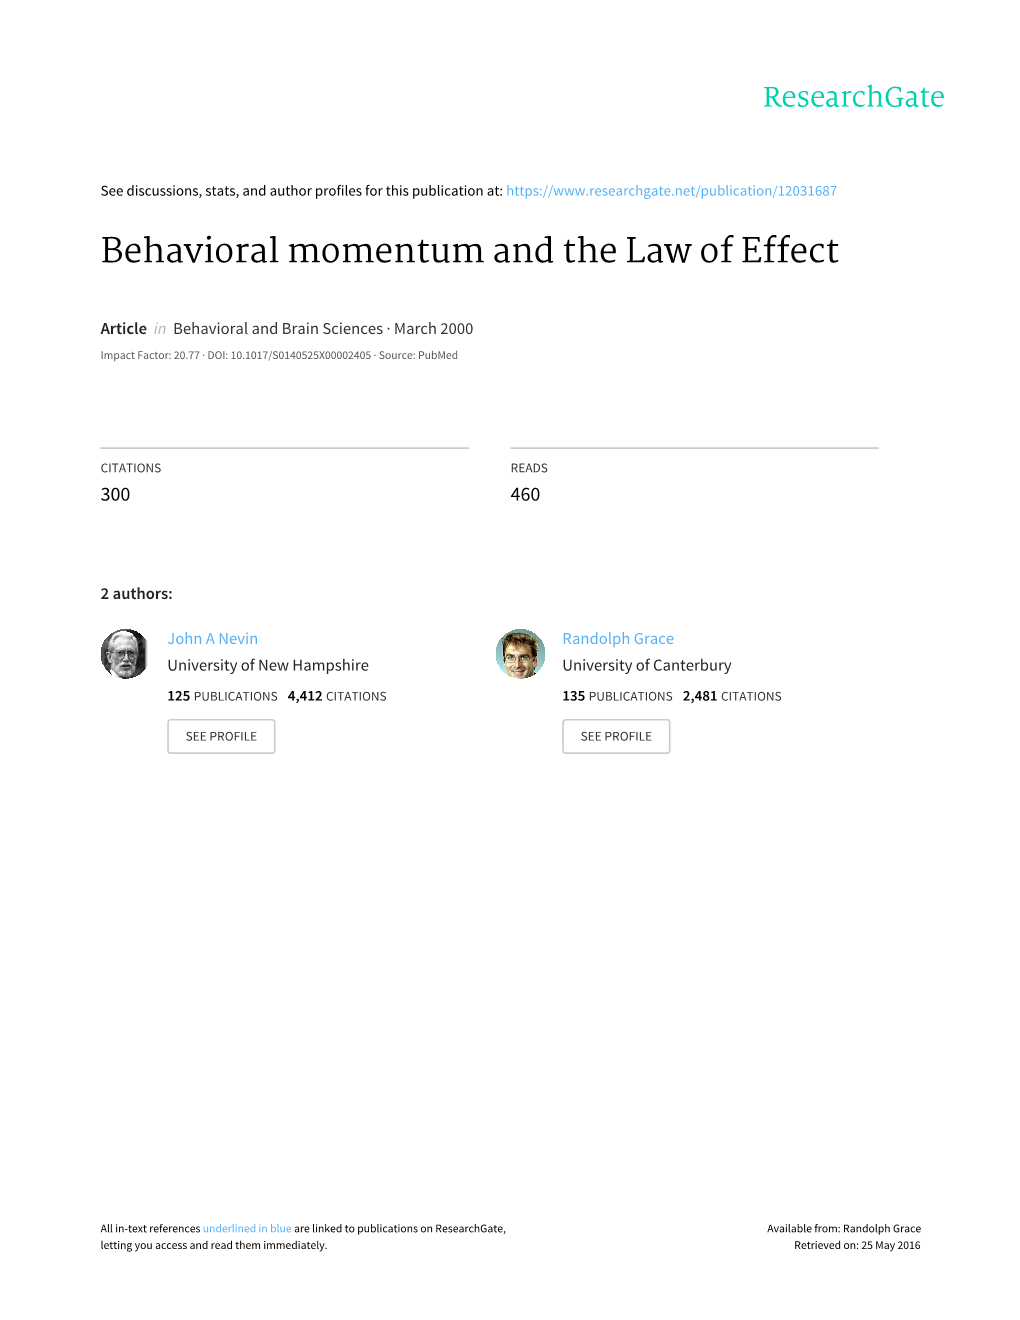 Behavioral Momentum and the Law of Effect